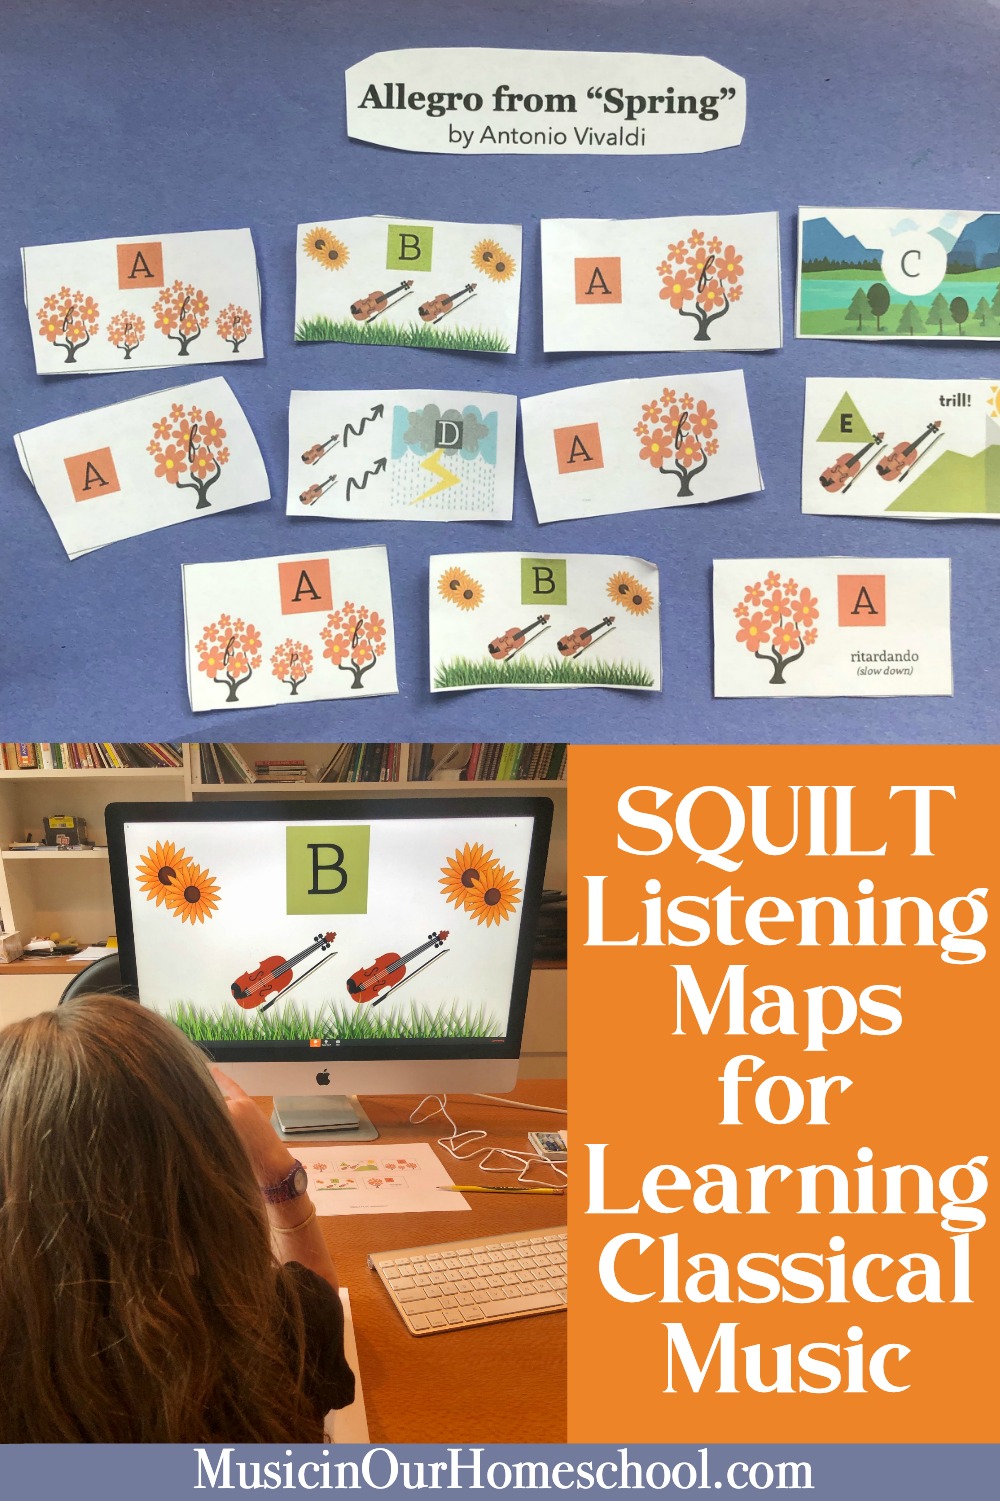 SQUILT Listening Maps are a great way for elementary music students to learn about Classical Music! Here is an example from Vivaldi's "Spring"